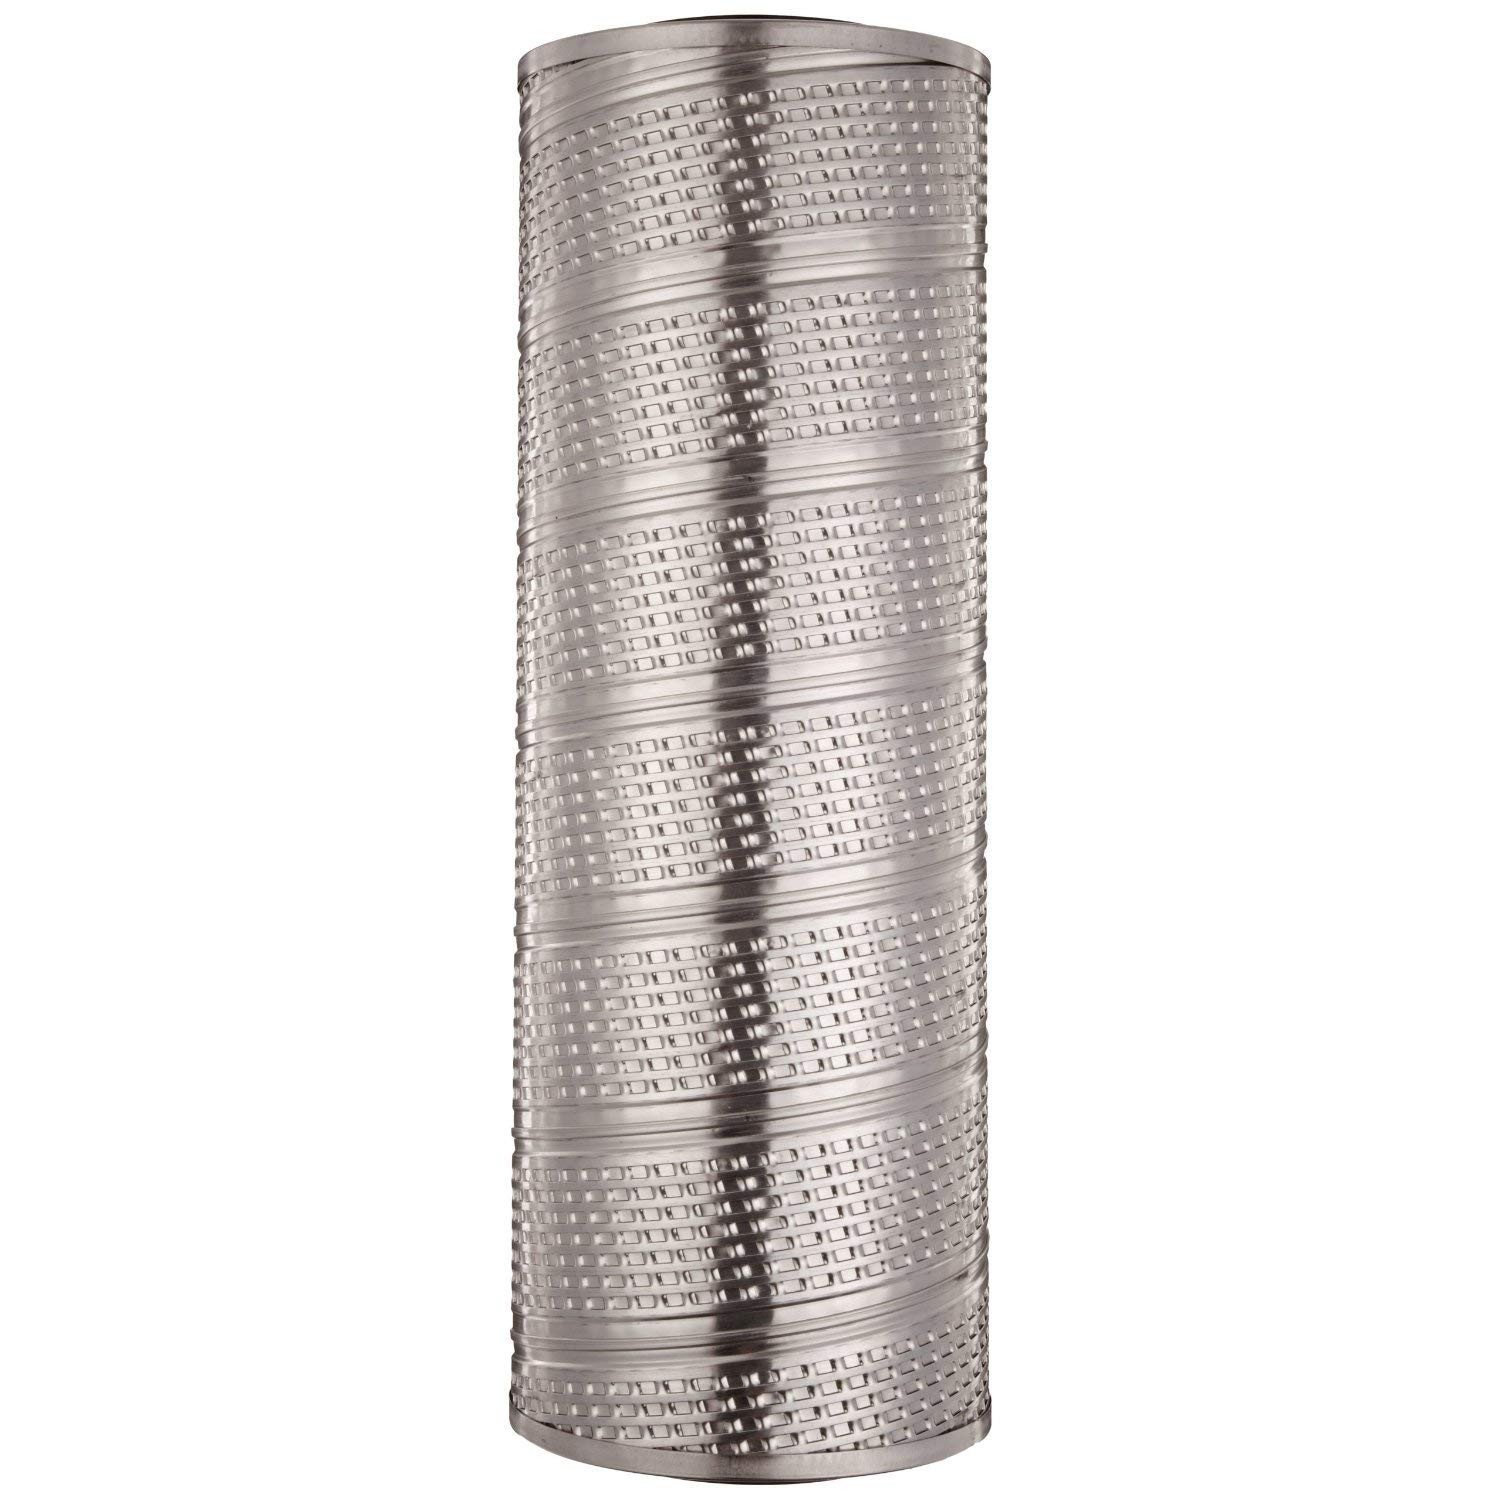 10 Amazing 8 Inch Cylinder Vase 2024 free download 8 inch cylinder vase of parker fp736 30 fulflo flo pac filter cartridge pleated phenolic throughout parker fp736 30 fulflo flo pac filter cartridge pleated phenolic impregnated cellulose med